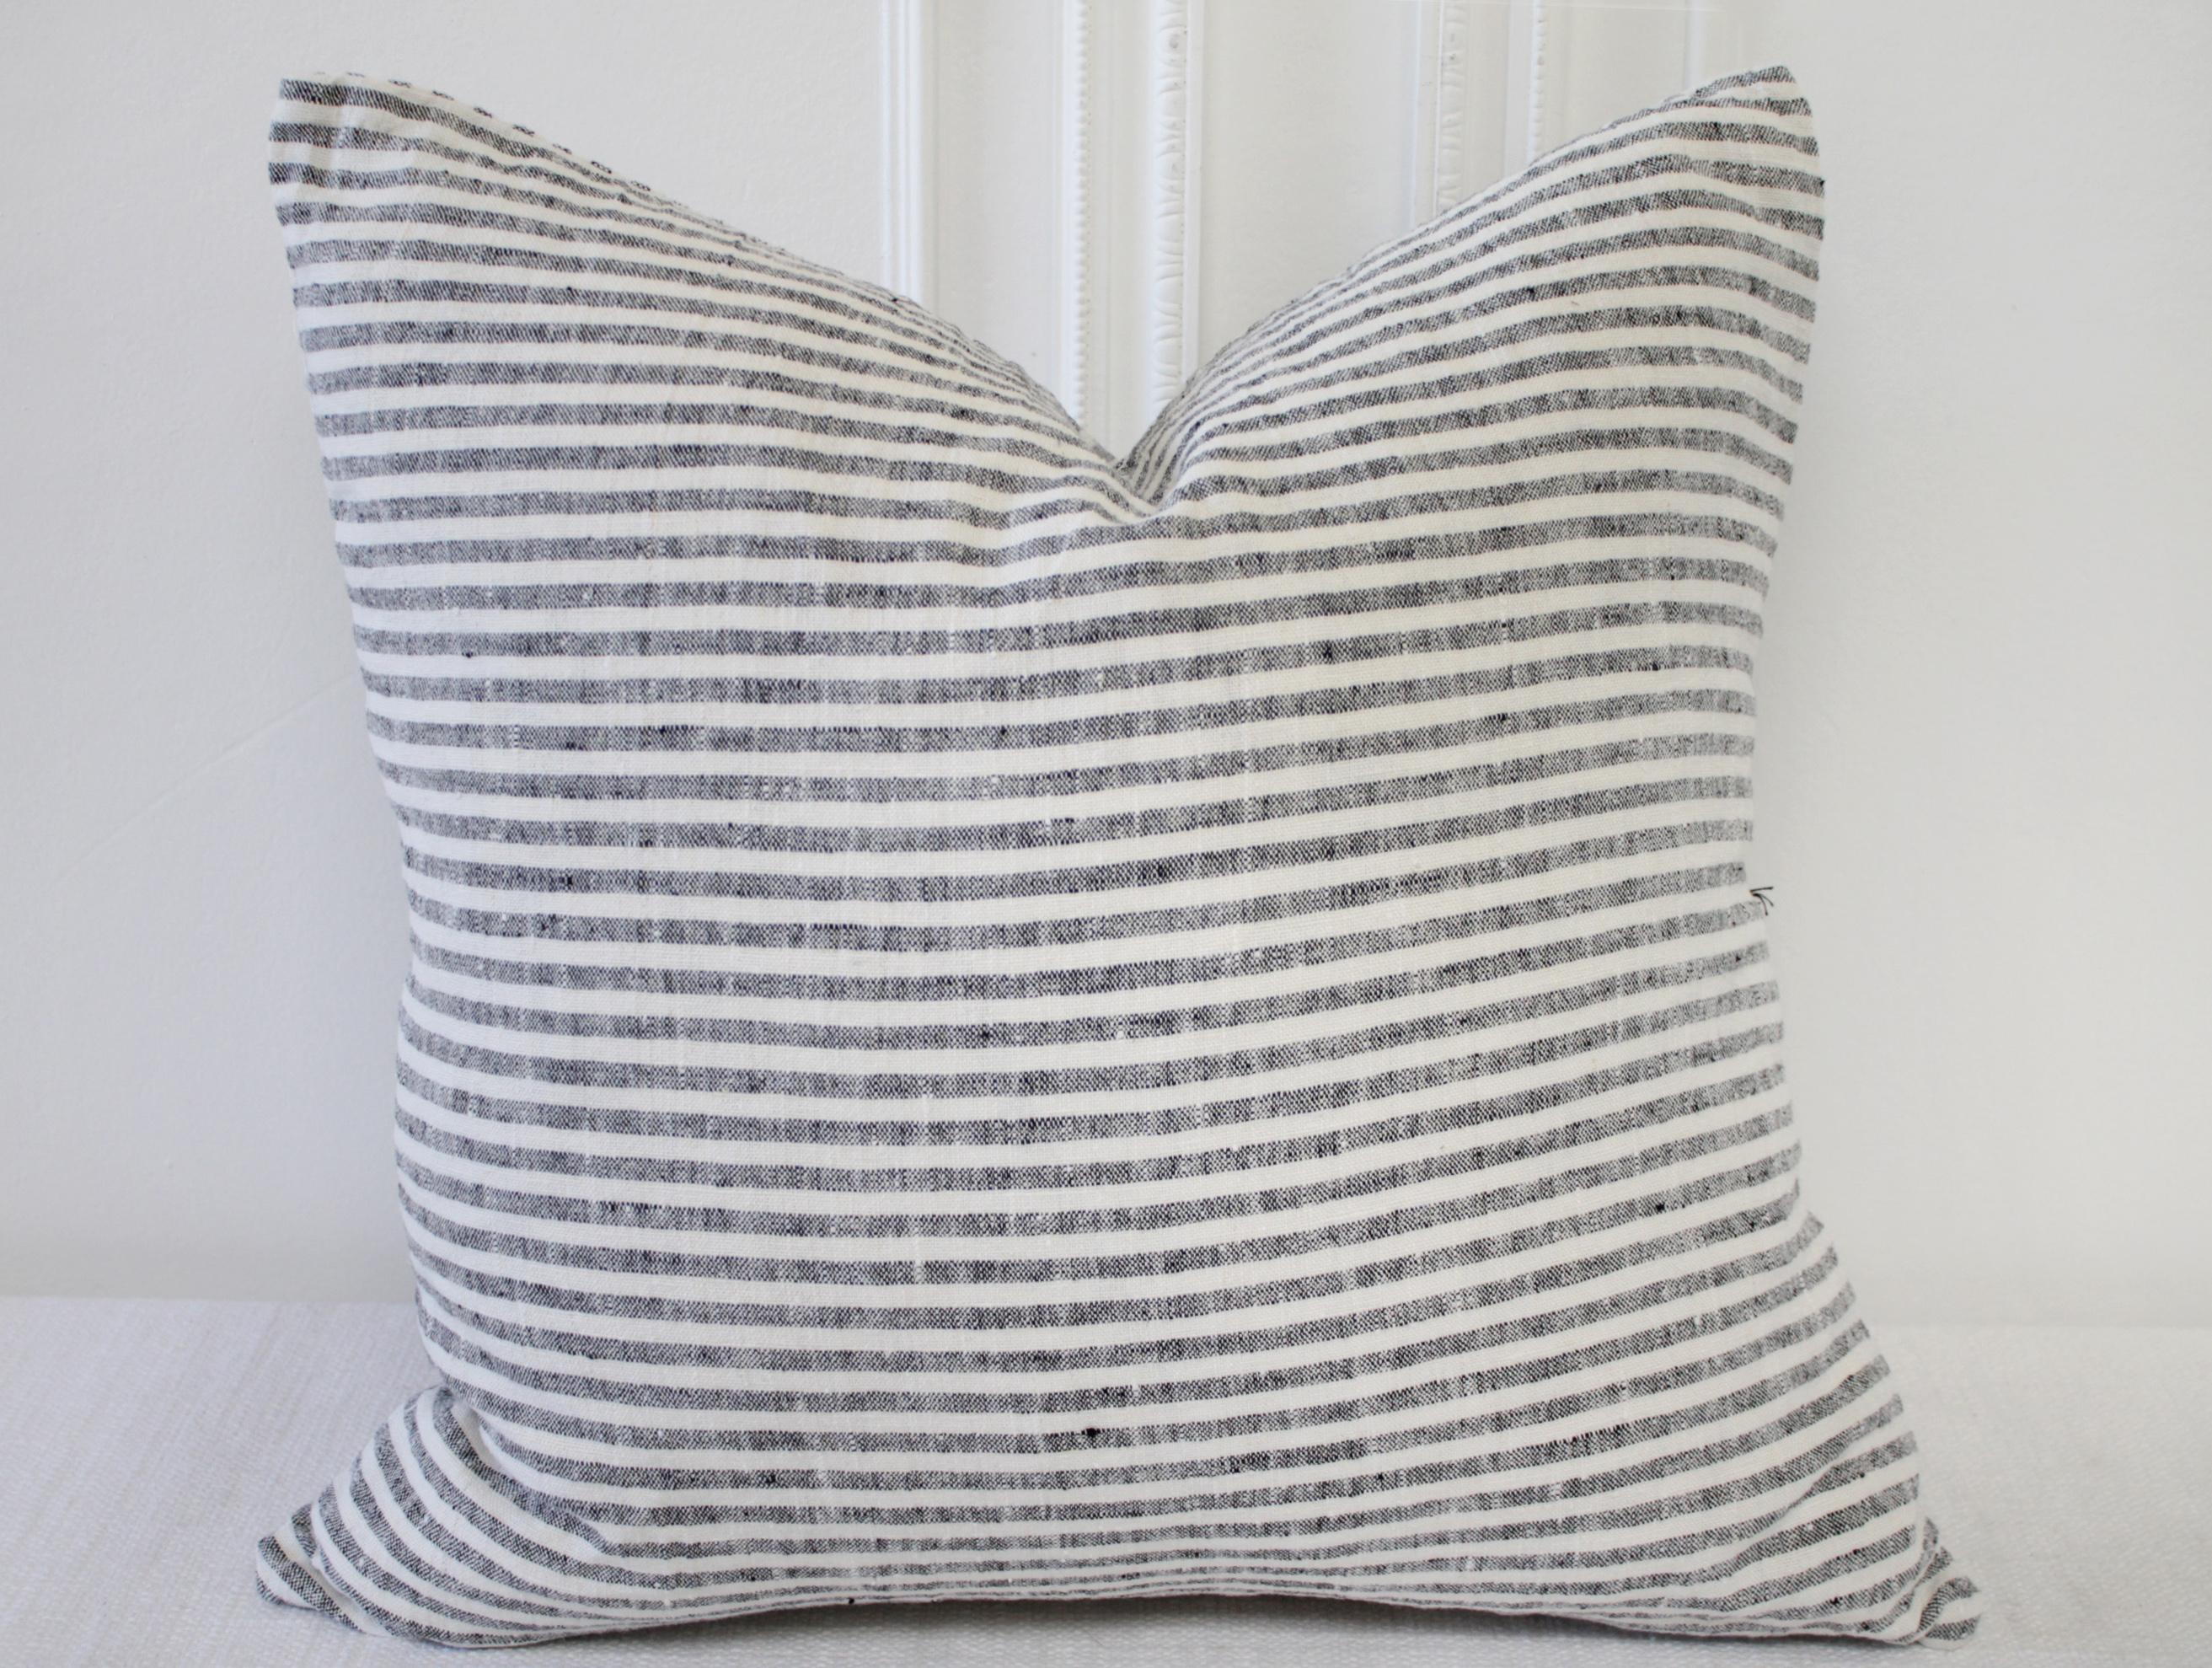 Organic Linen Accent Pillows in Black and White Ticking Stripe In New Condition For Sale In Brea, CA